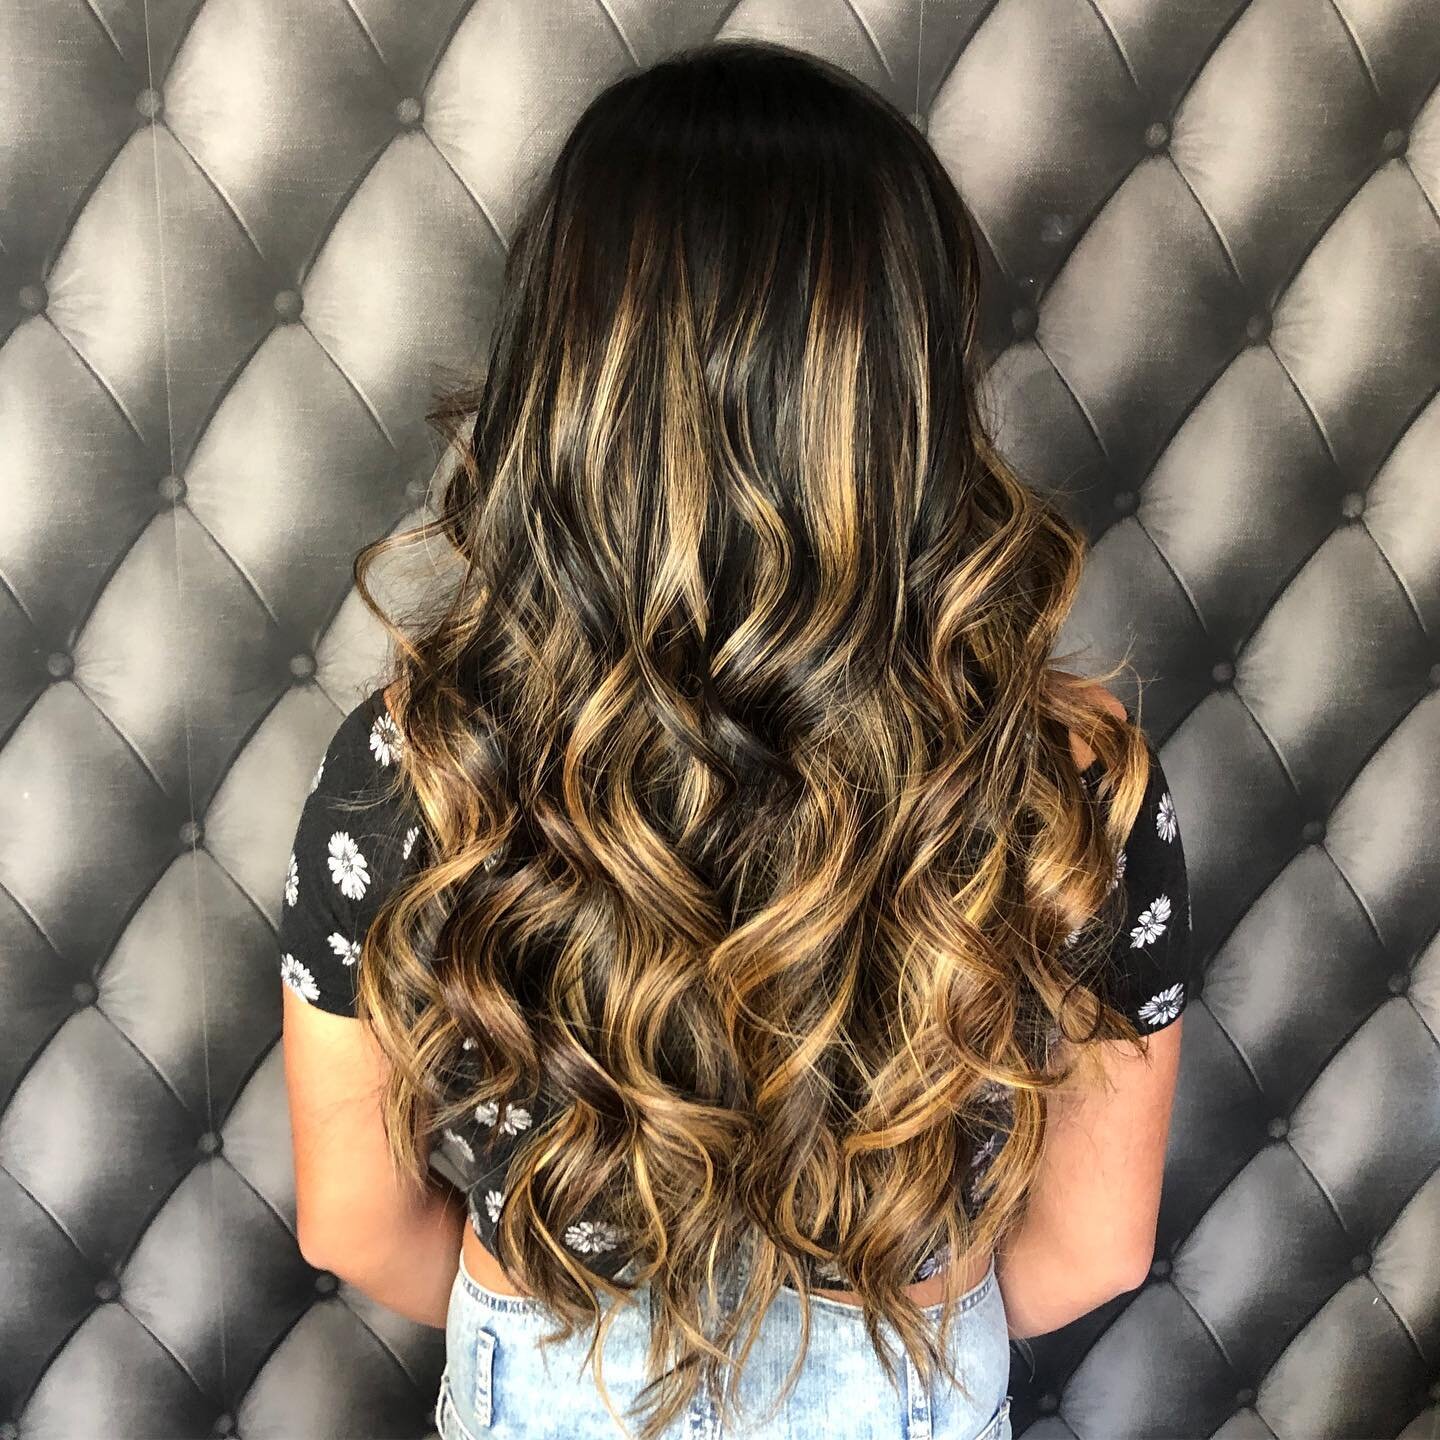 {Bold} &amp; Bougie 🎶💓😜 #hair #hairstylist #hairstyles #haircolor #haircut #hairstyle #haircolorist #hairart #hairdresser #hairdo #hairstyling #highlights #highlites #highlitedhair #highlightedhair #foilyage #sanjosehair #willowglenhair